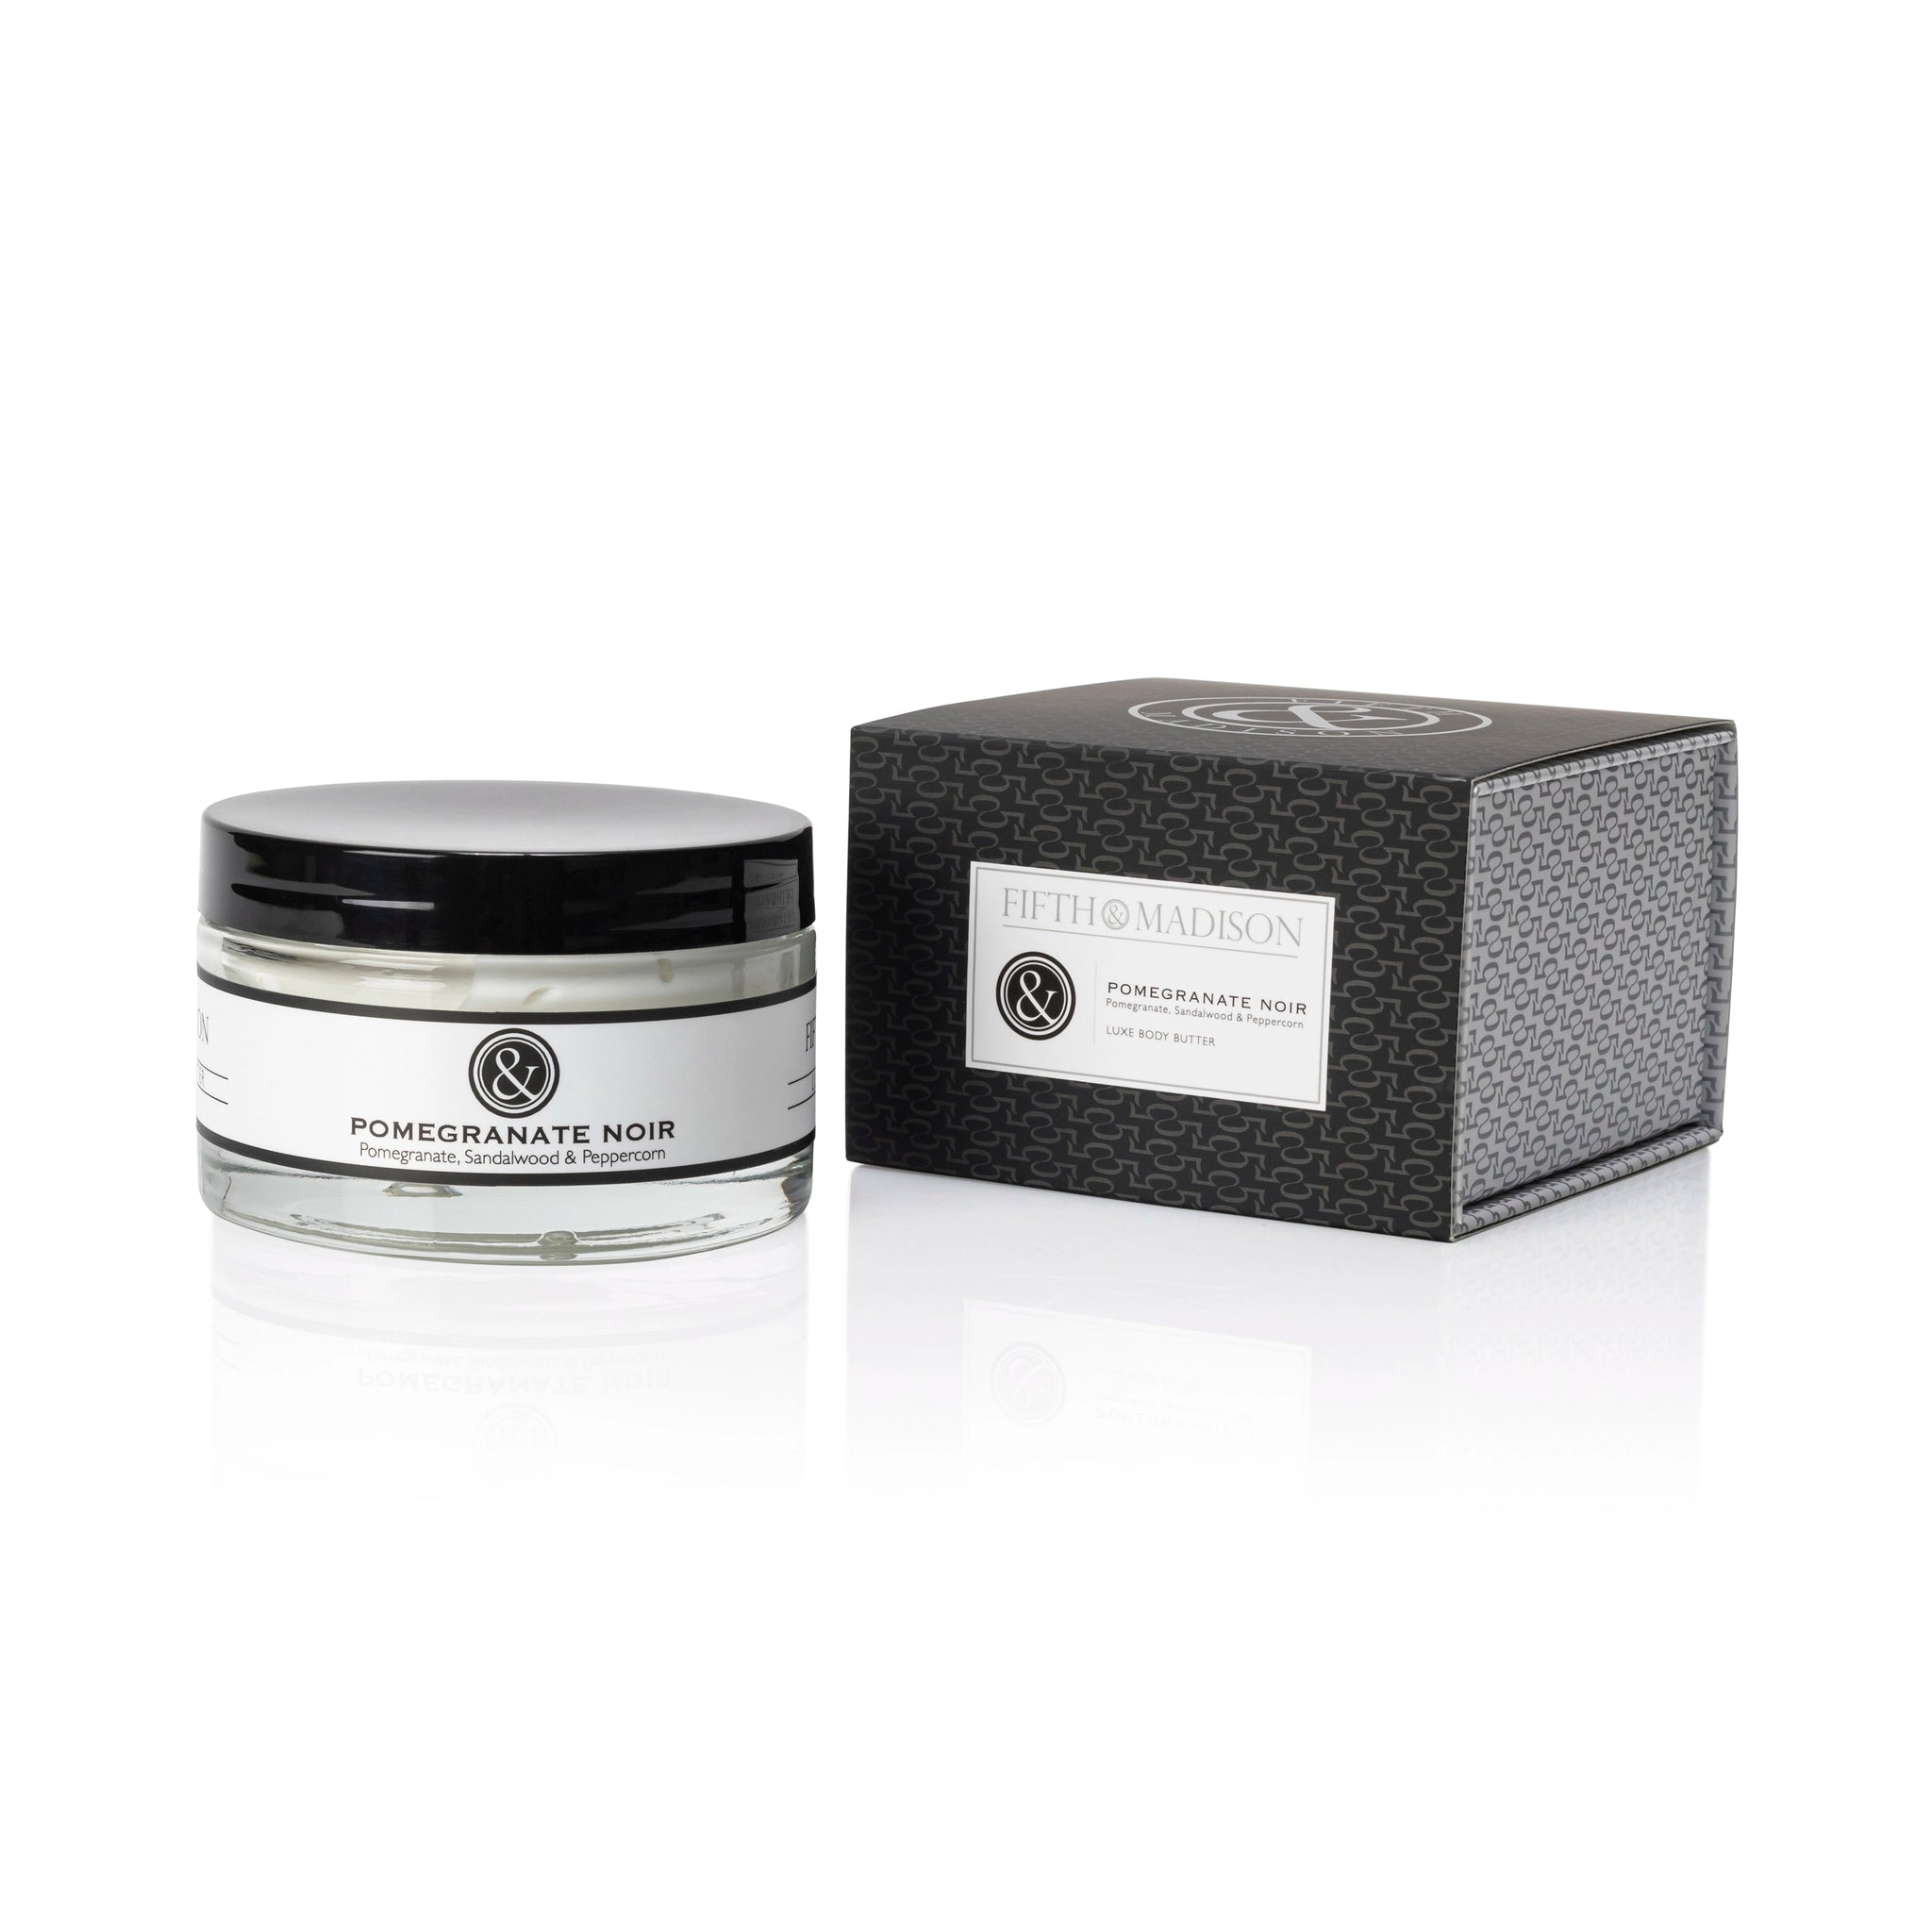 Pomegranate Noir 5th & Madison Luxe Body Butter